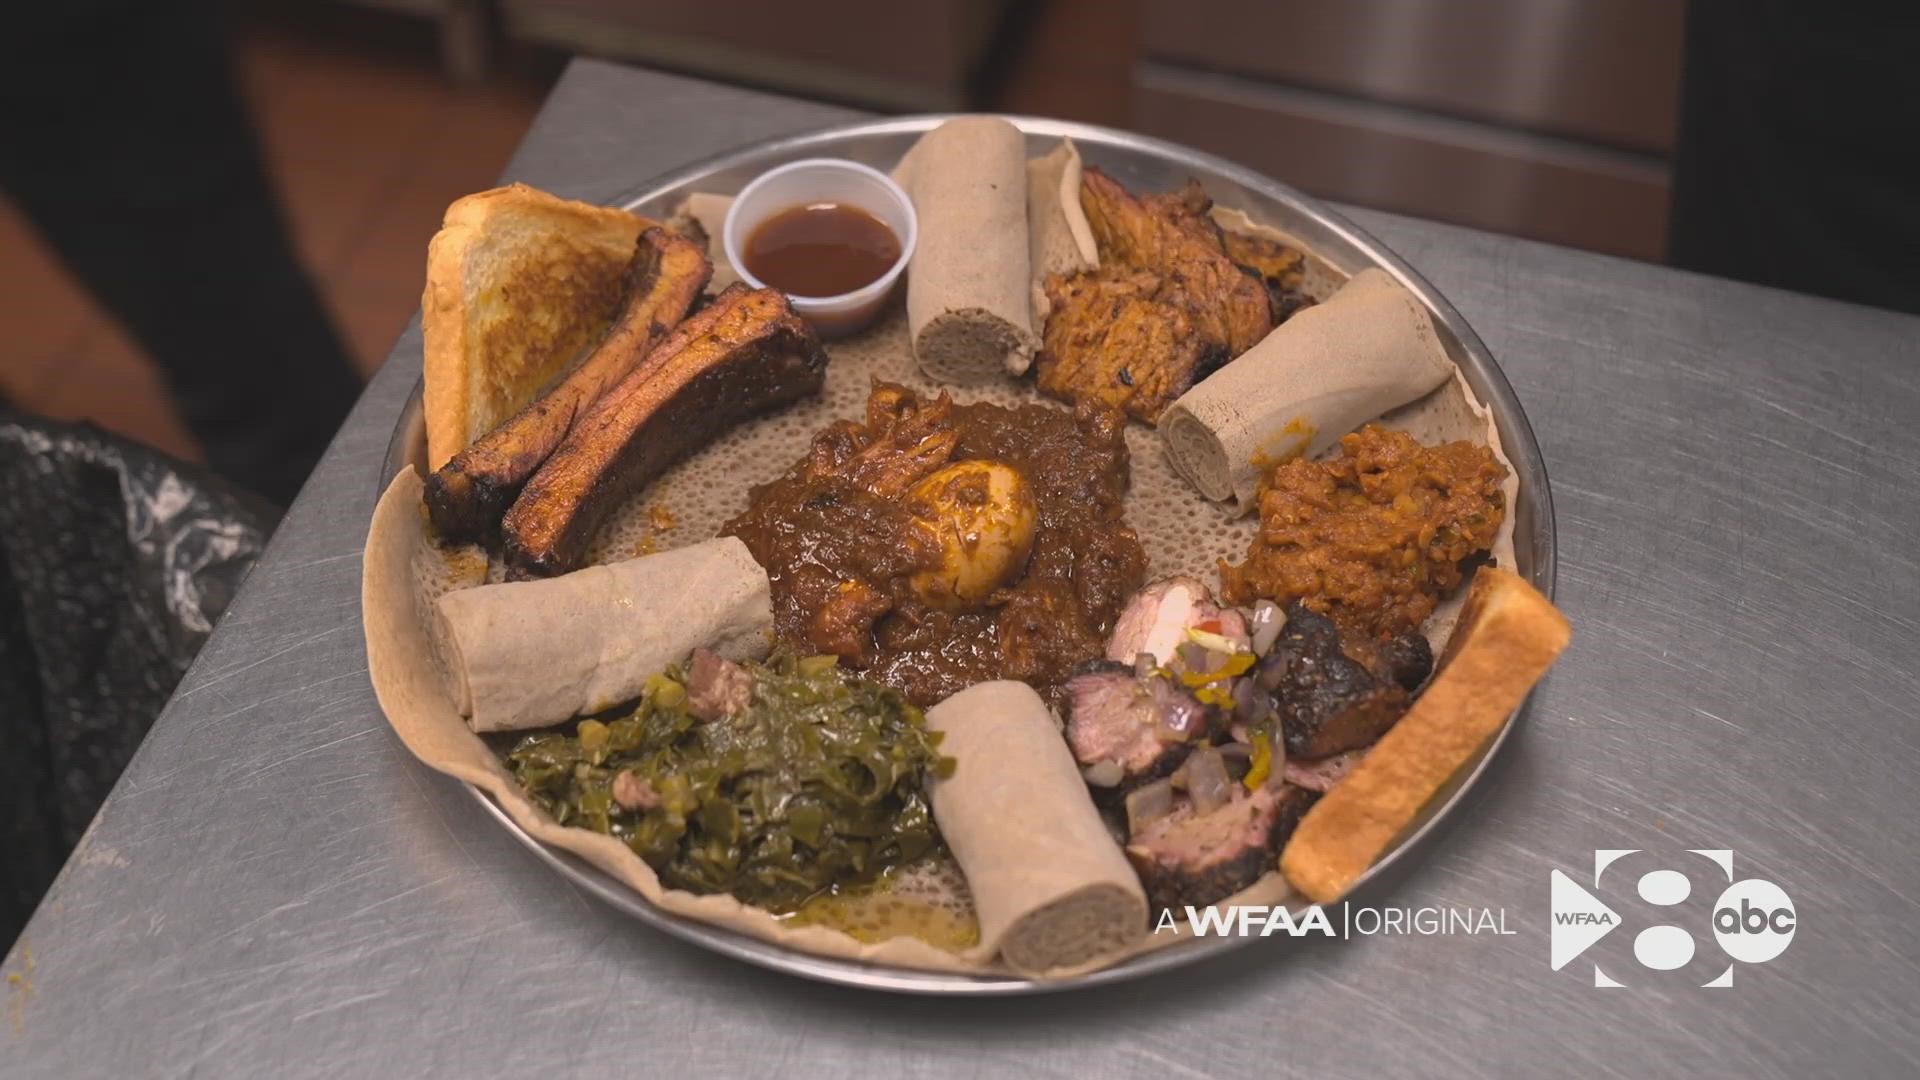 Tex-Ethiopian restaurant Smoke'N Ash BBQ in Arlington was named one of 2022's best restaurants by the New York Times.